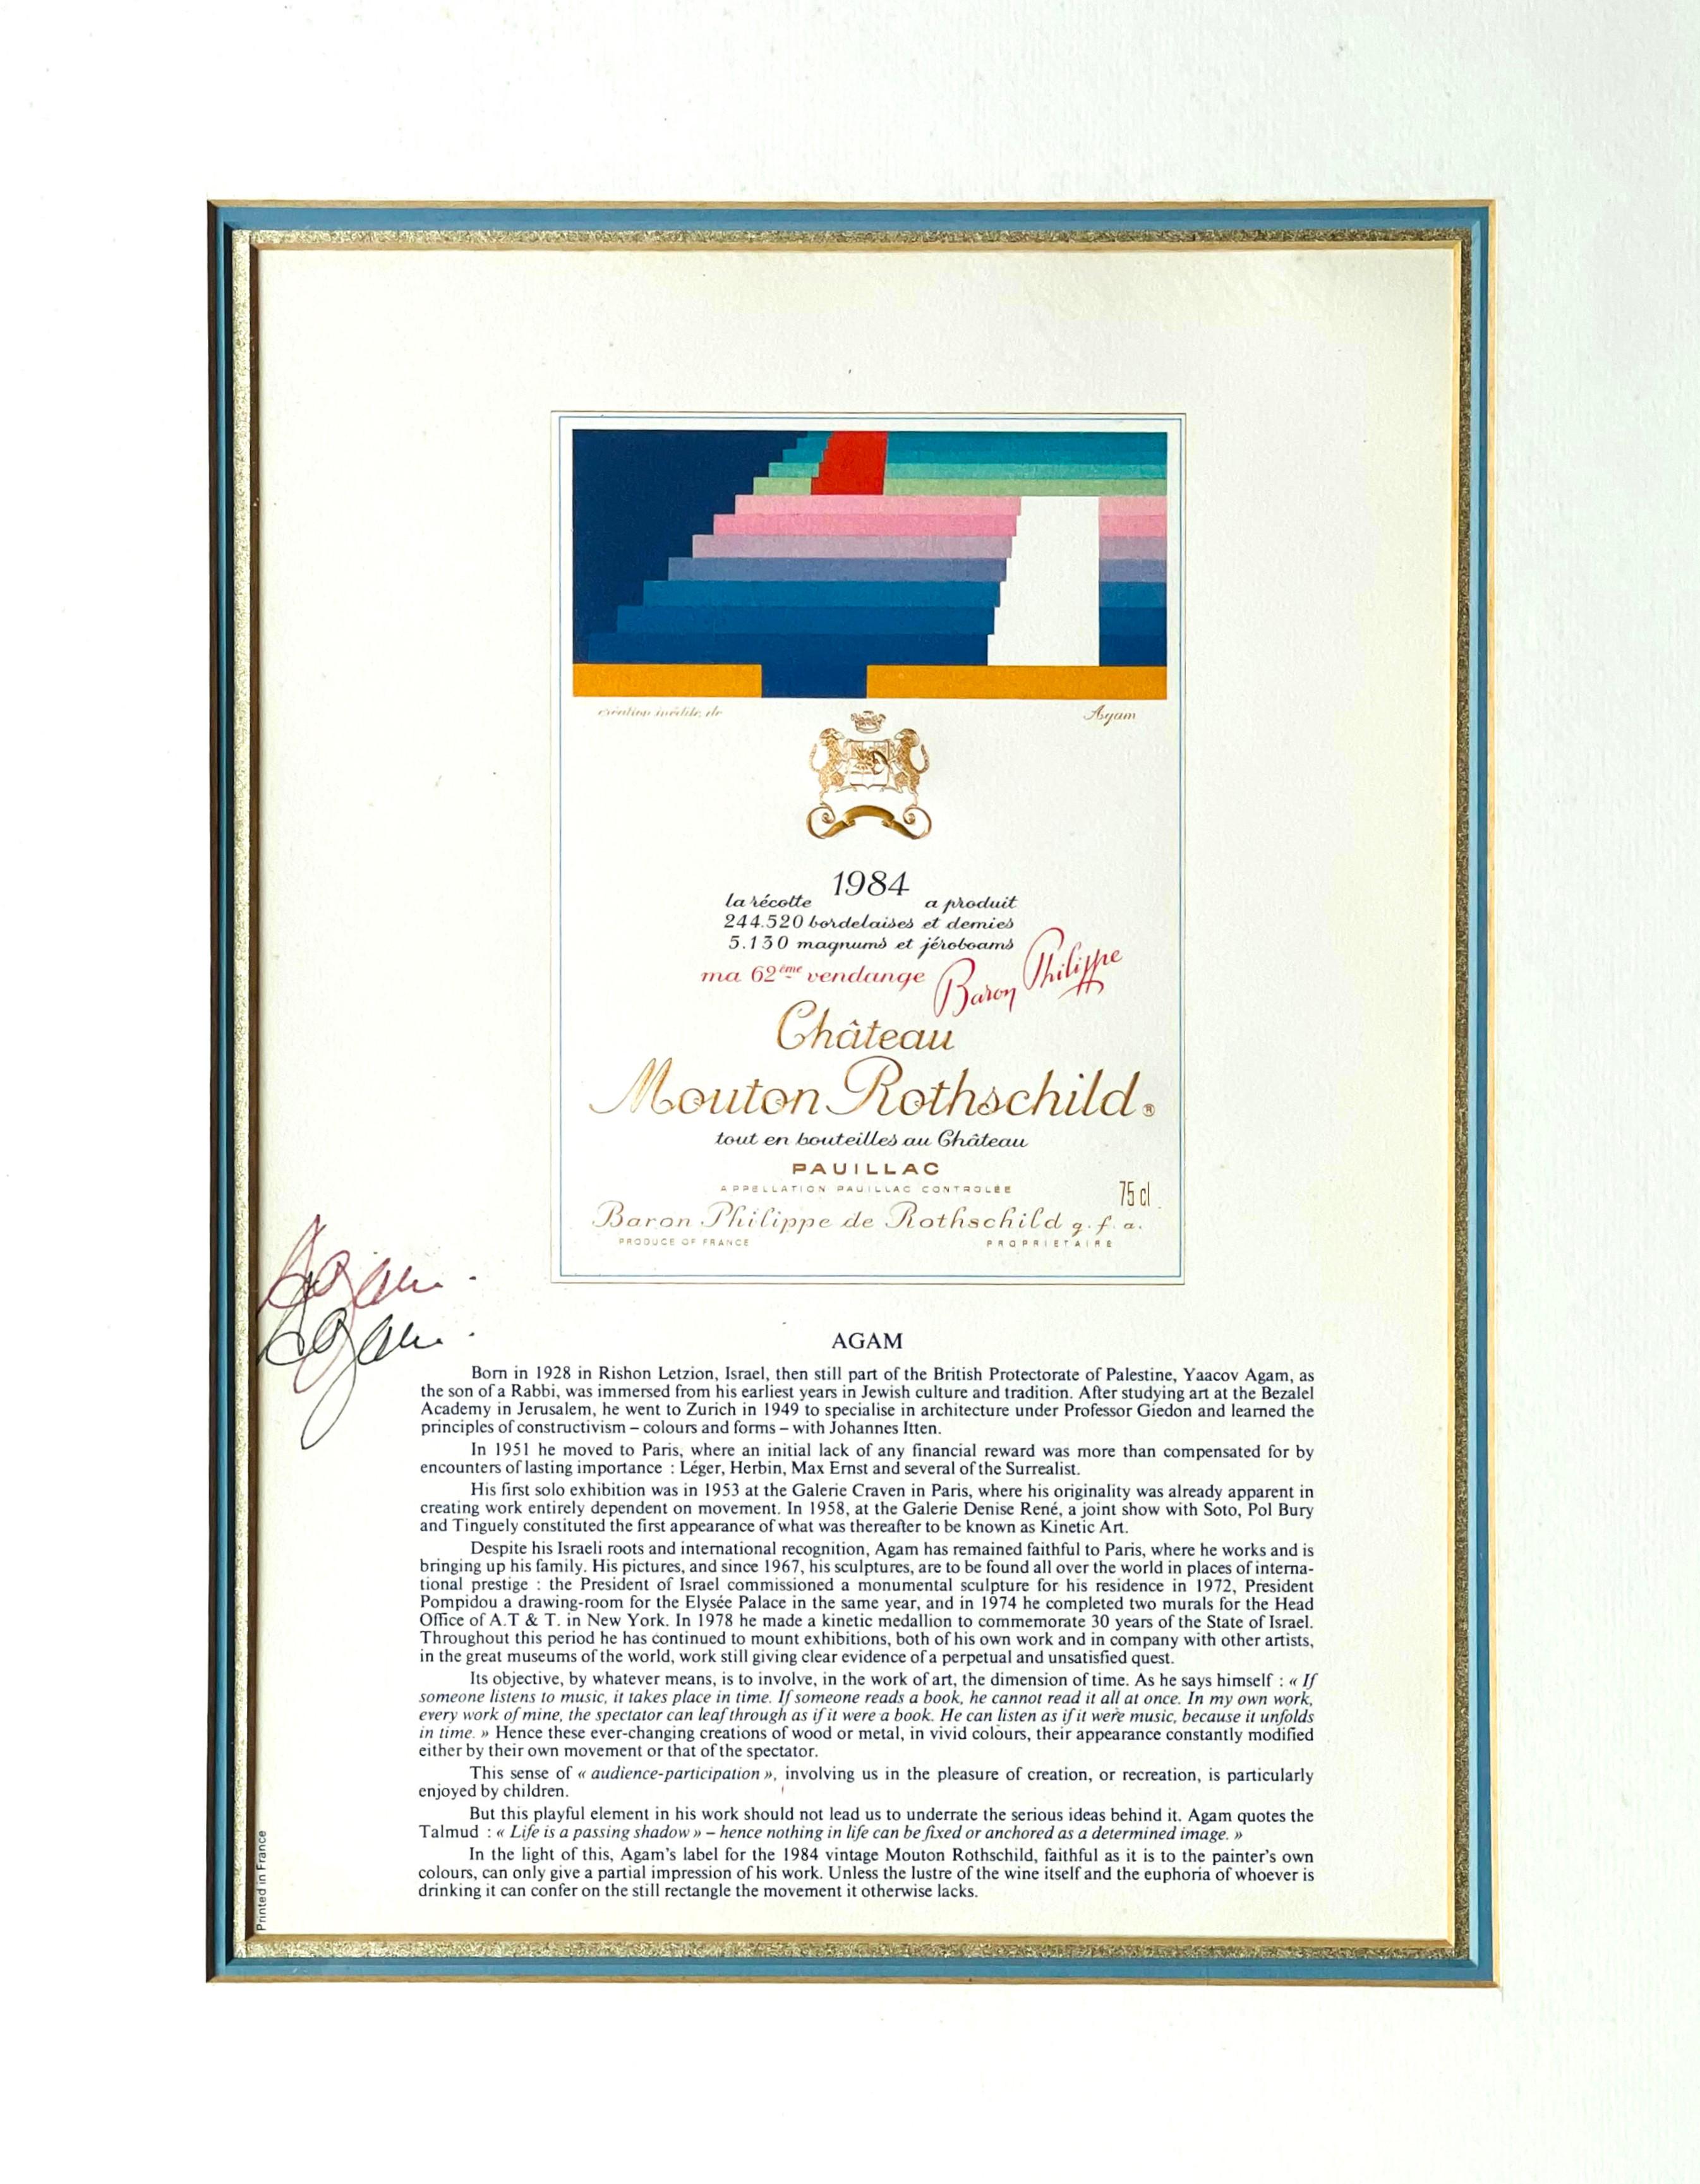 Chateau Mouton Rothschild label (hand signed)